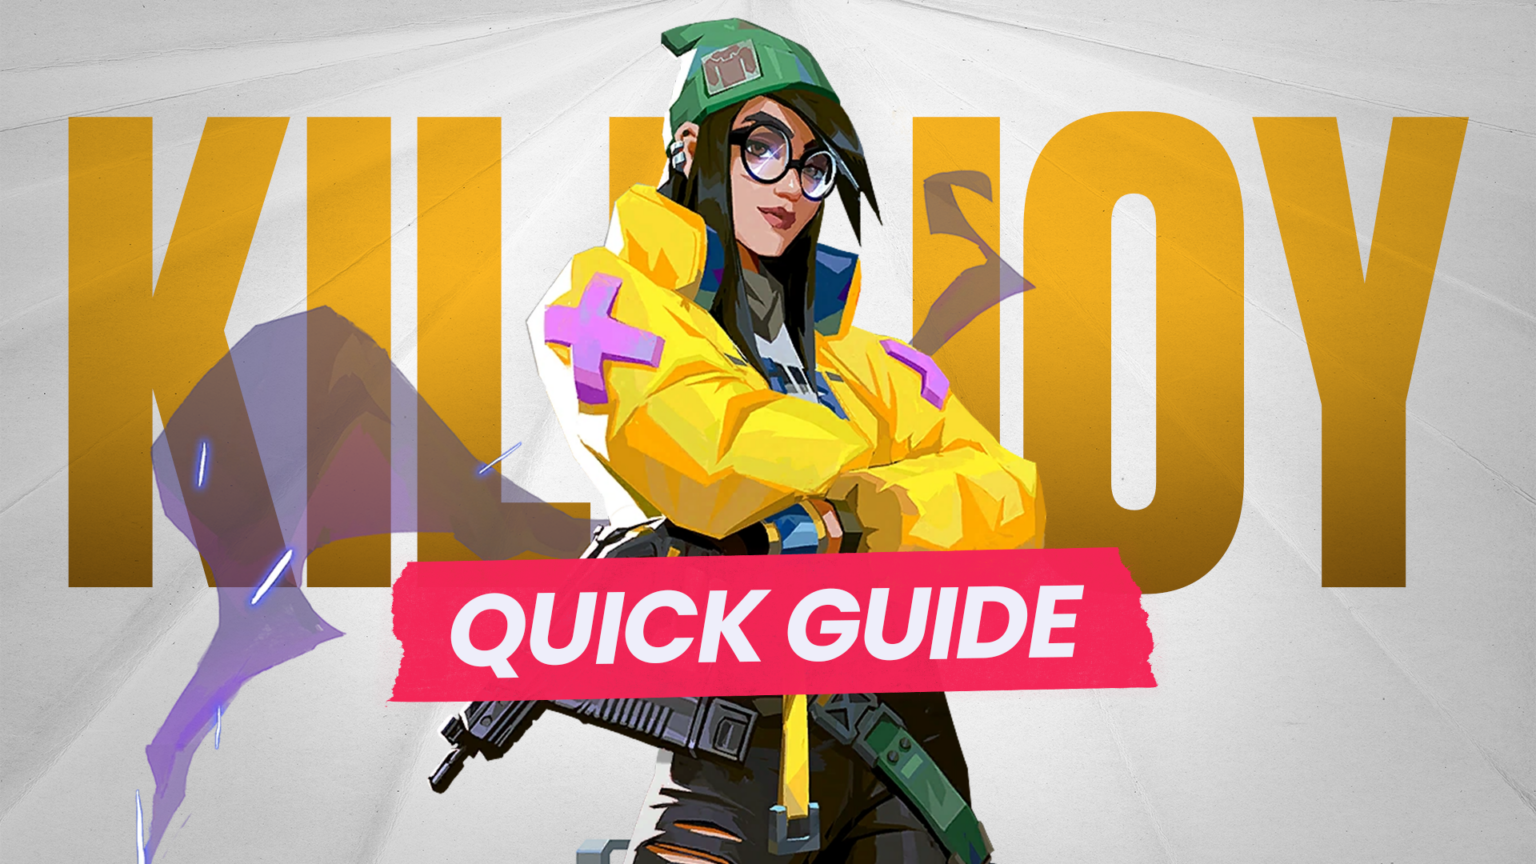 Killjoy Quick Guide – Abilities, Tips and Tricks for Beginners - ProGuides